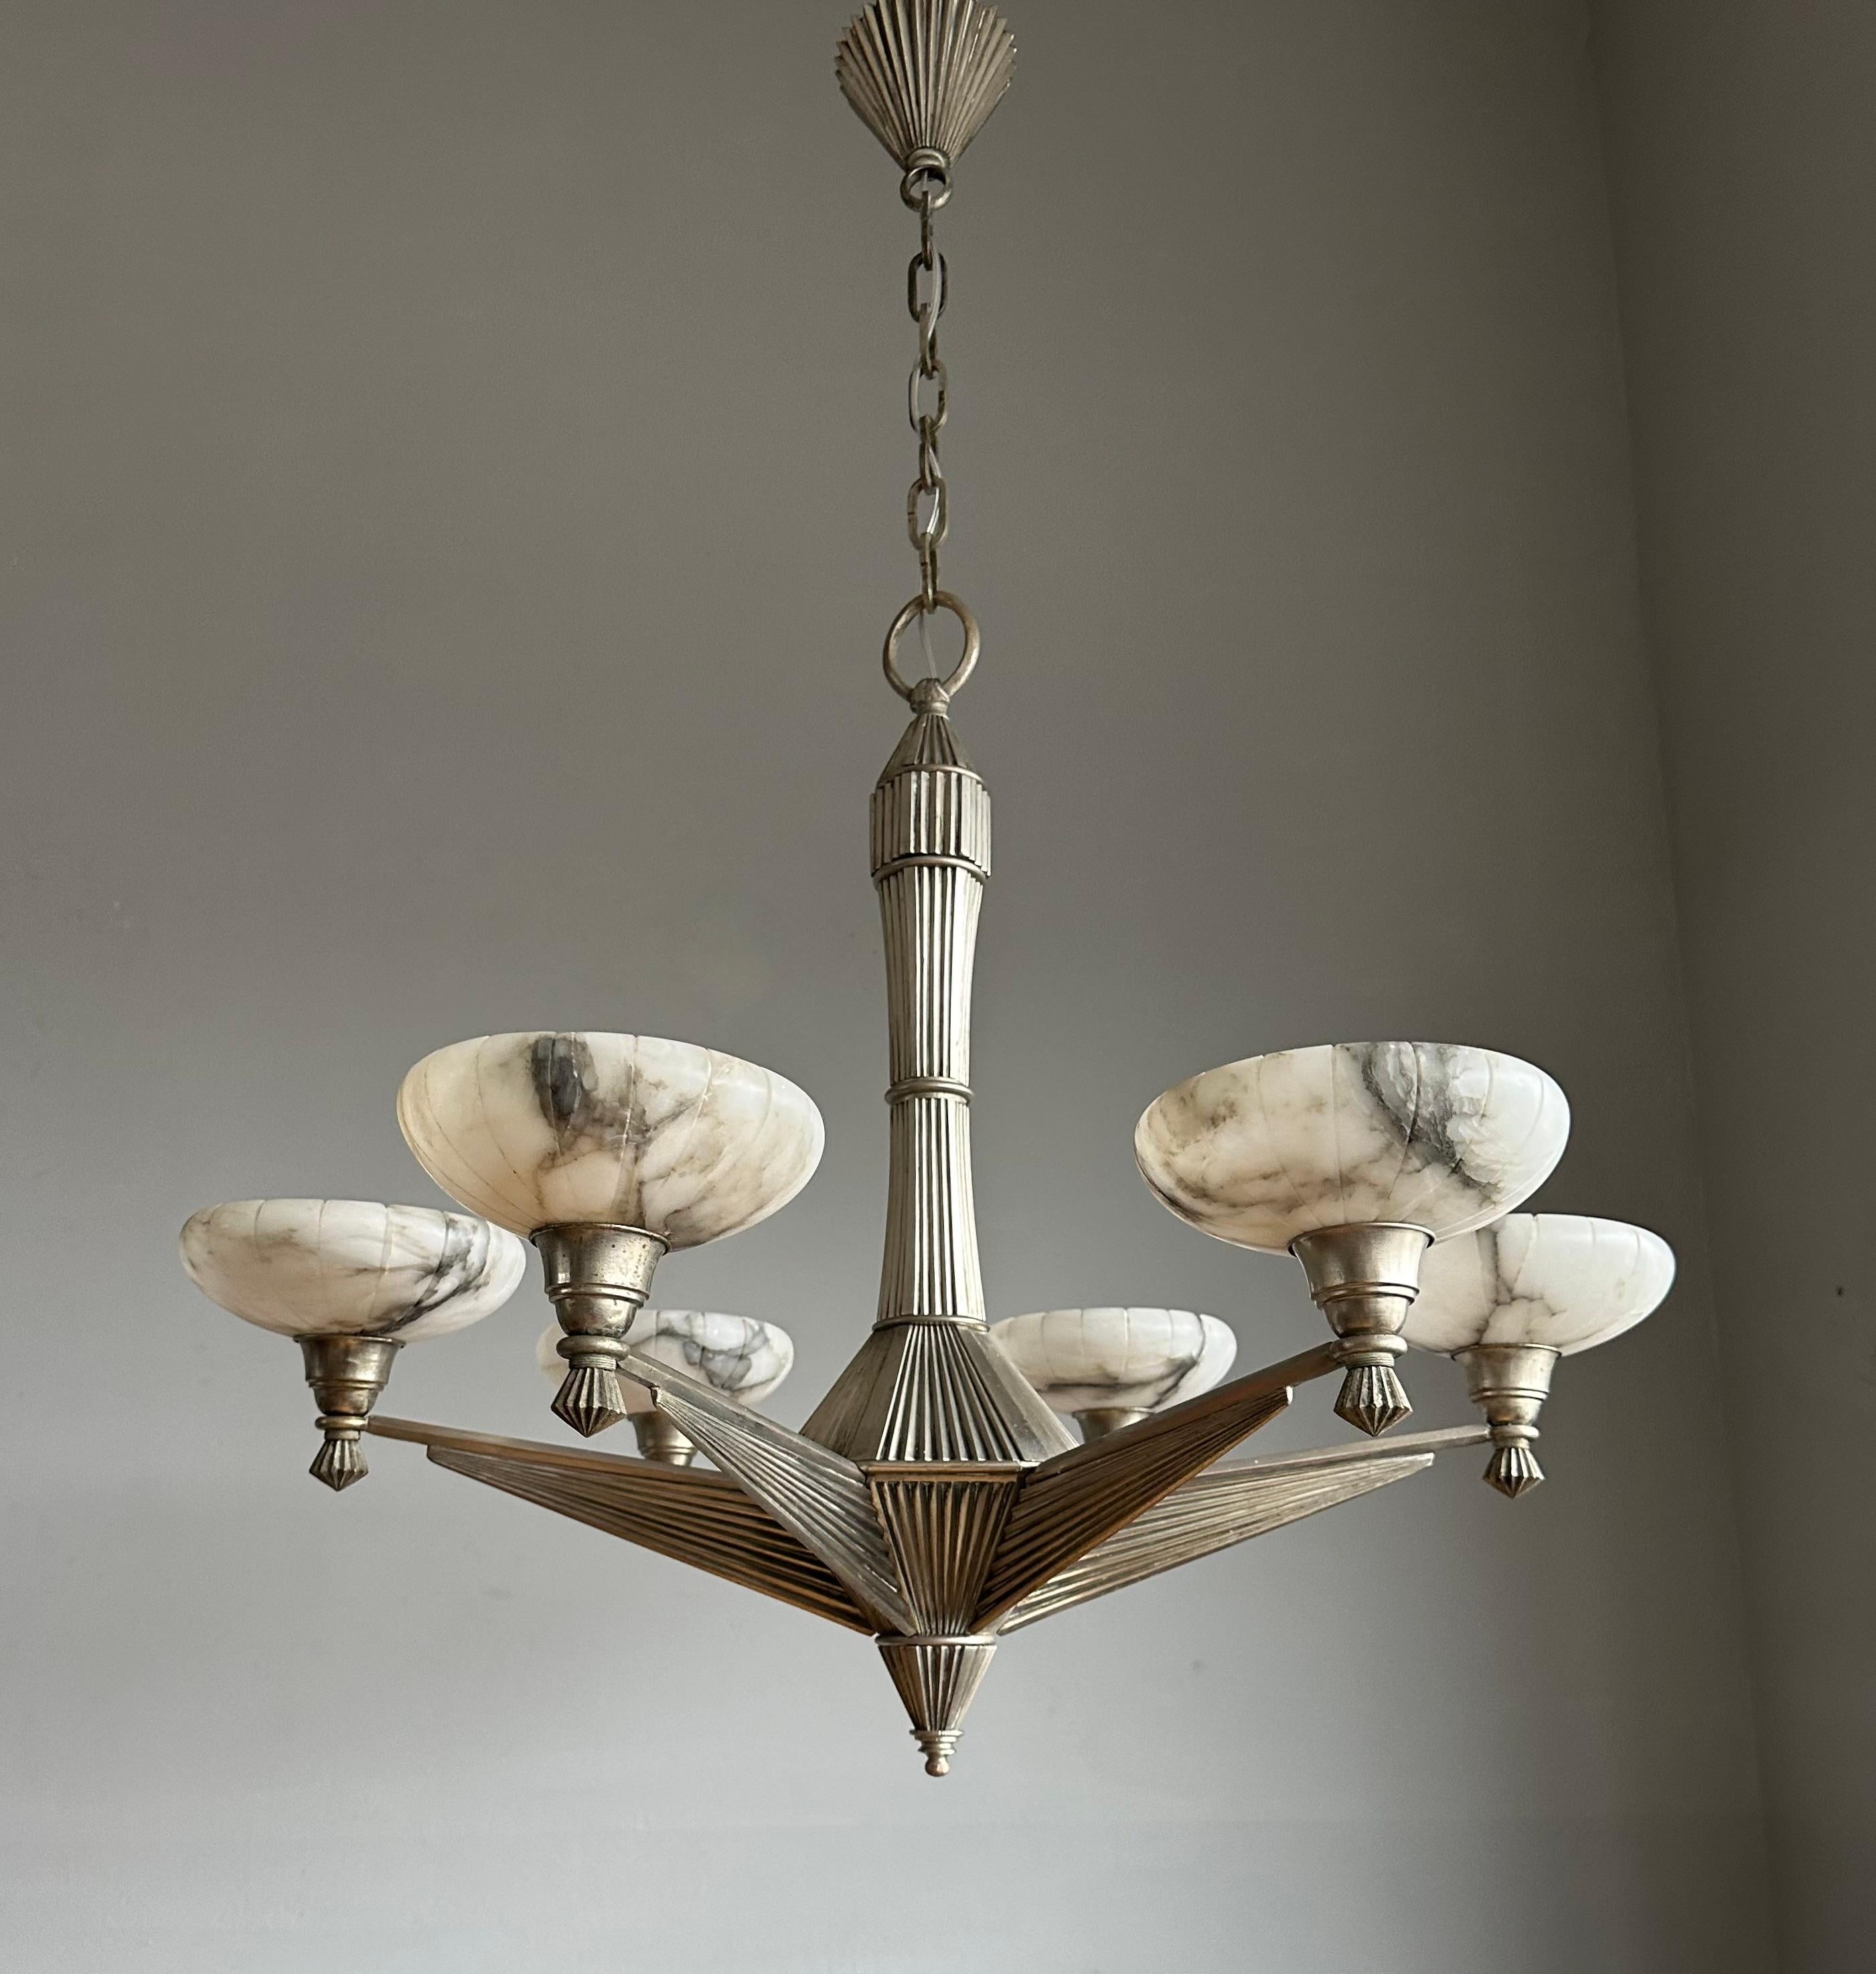 Top Art Deco Design Silvered Bronze and Six Alabaster Shades Chandelier, 1920 For Sale 6